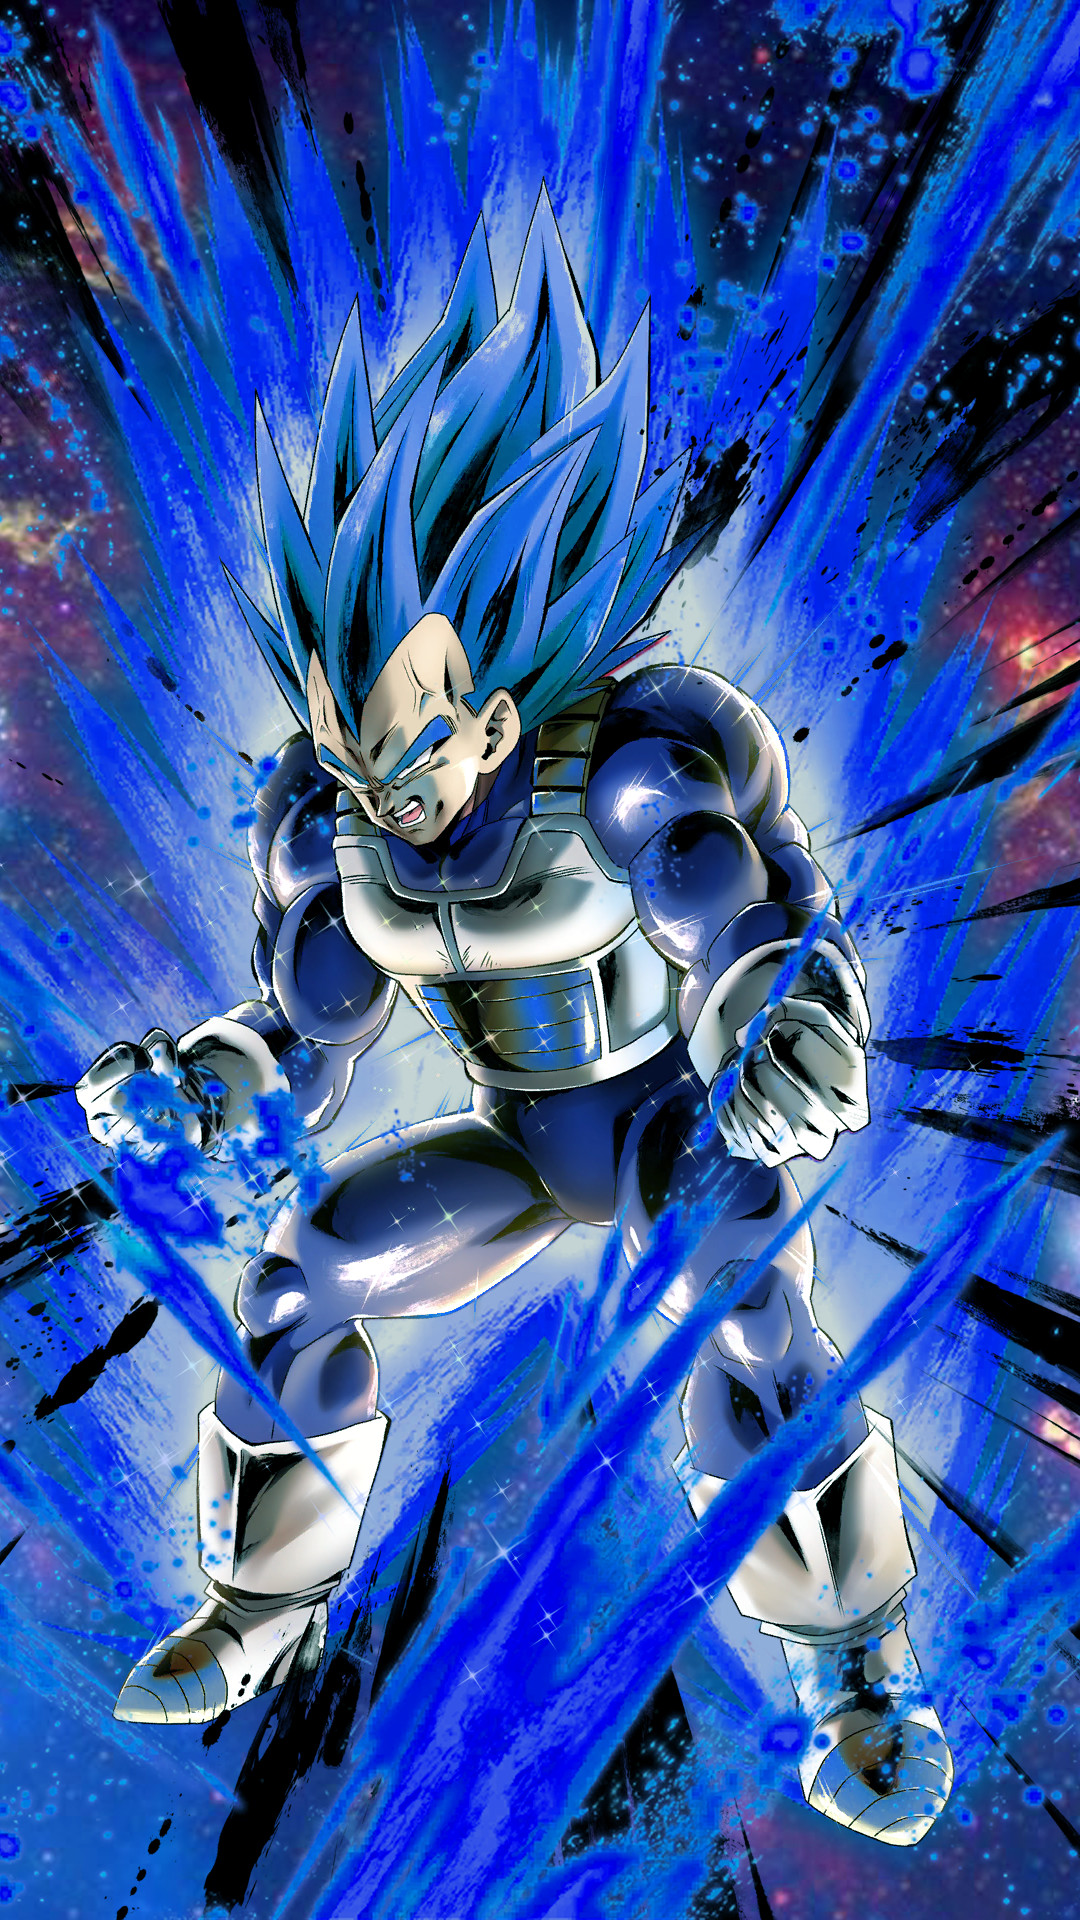 Vegeta Wallpaper For Android (76+ images)